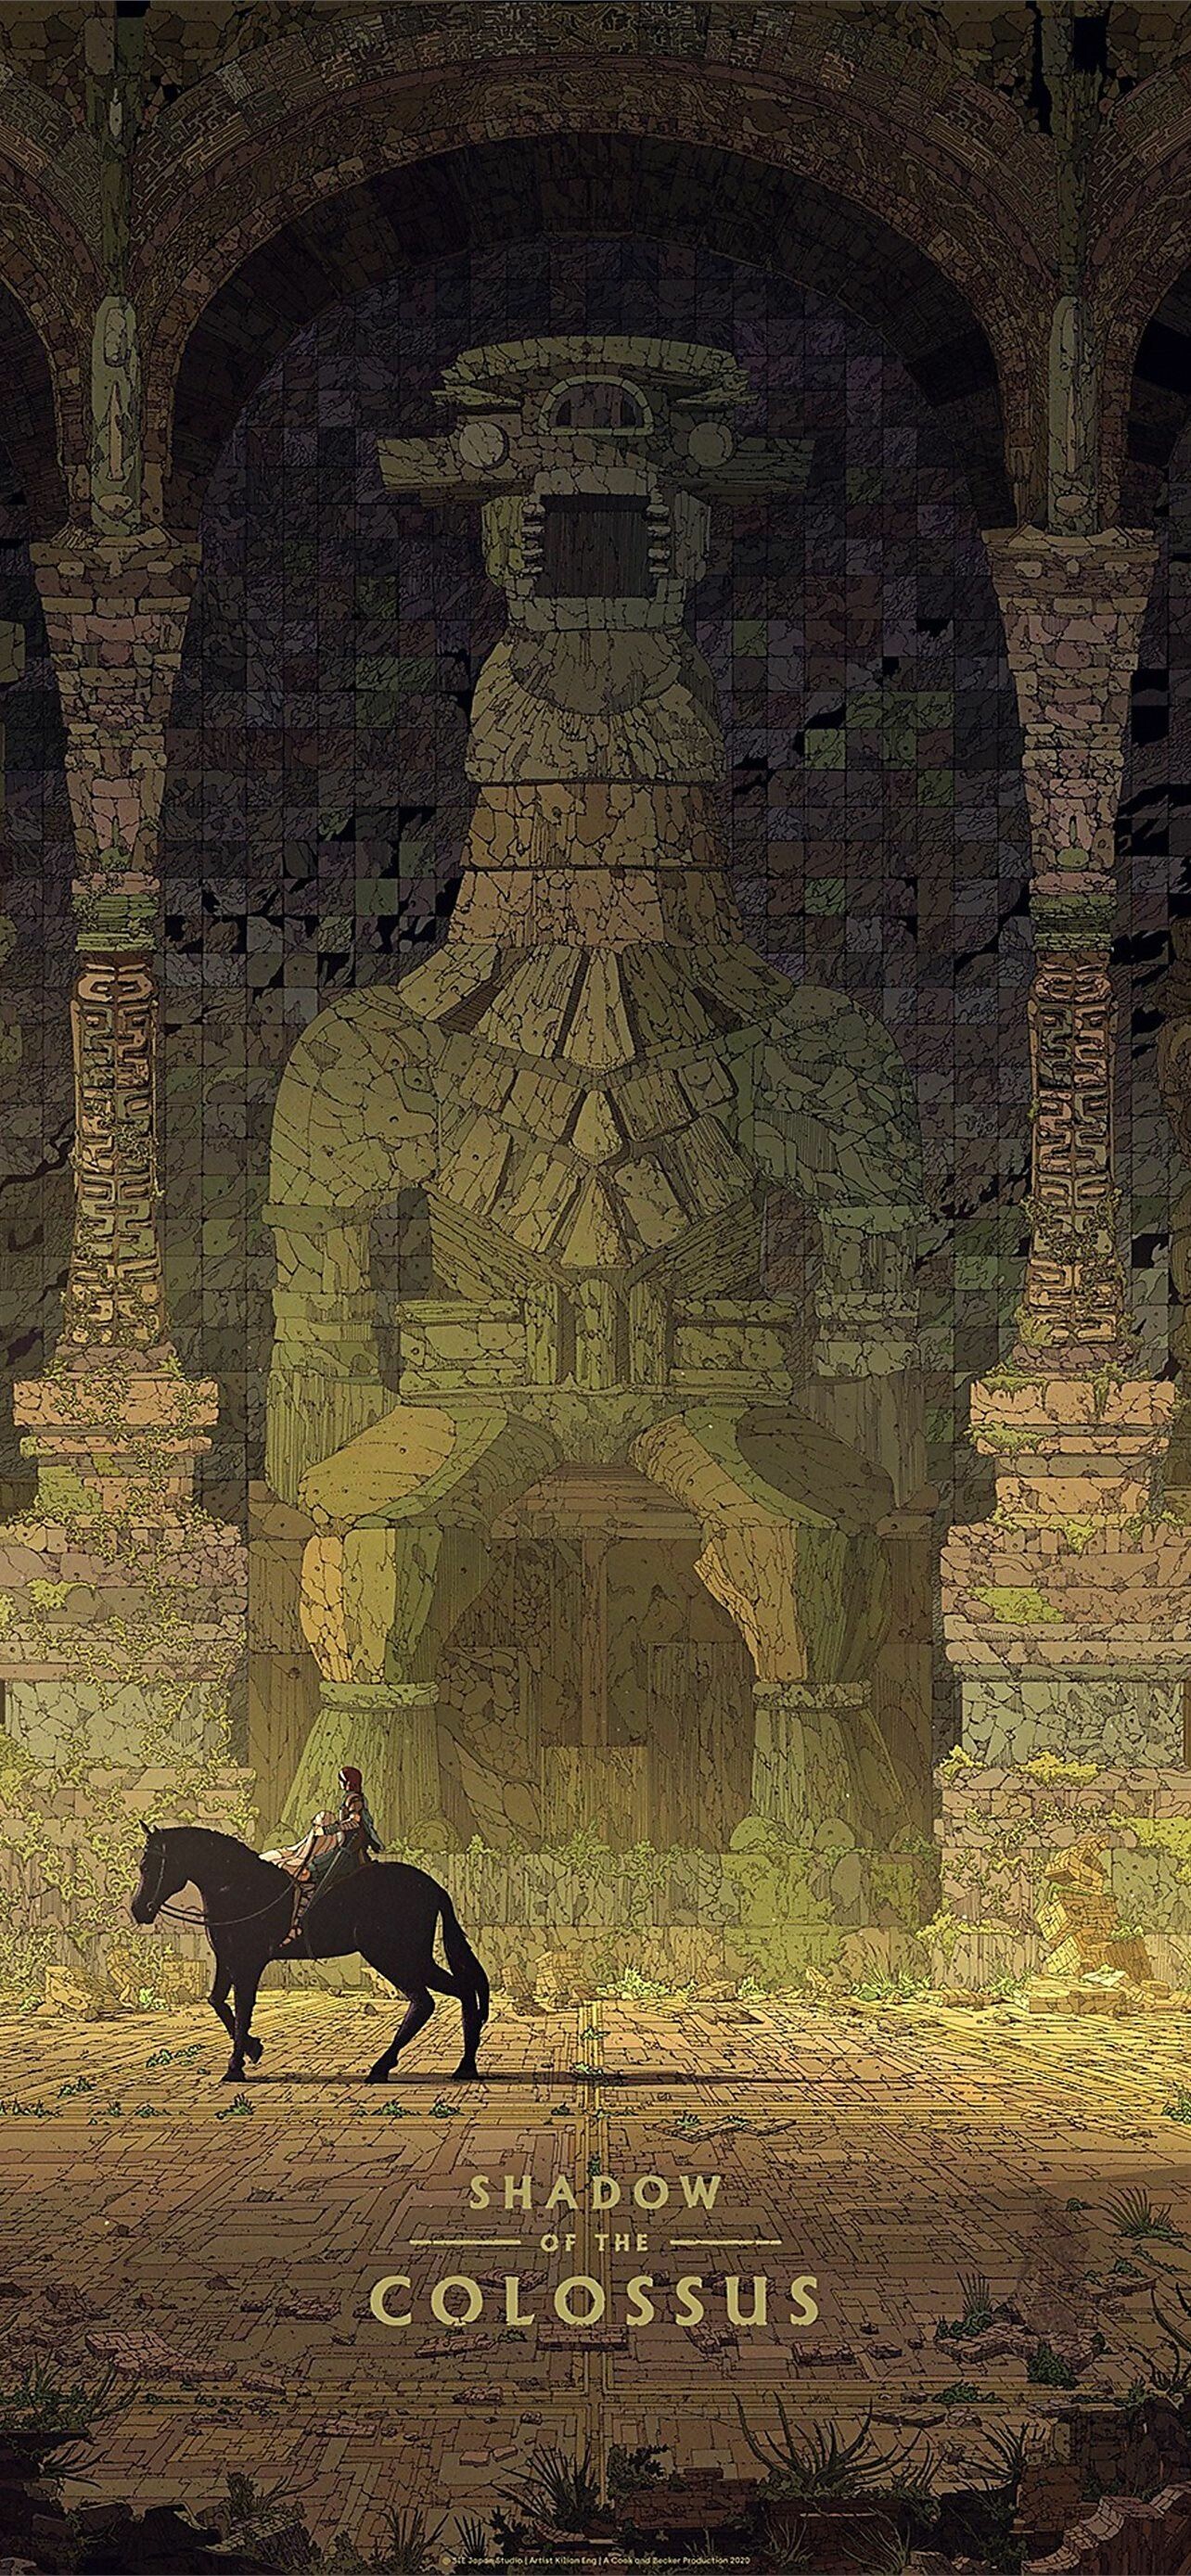 Shadow of the Colossus: The game released in Japan as Wander and the Colossus. 1290x2780 HD Wallpaper.